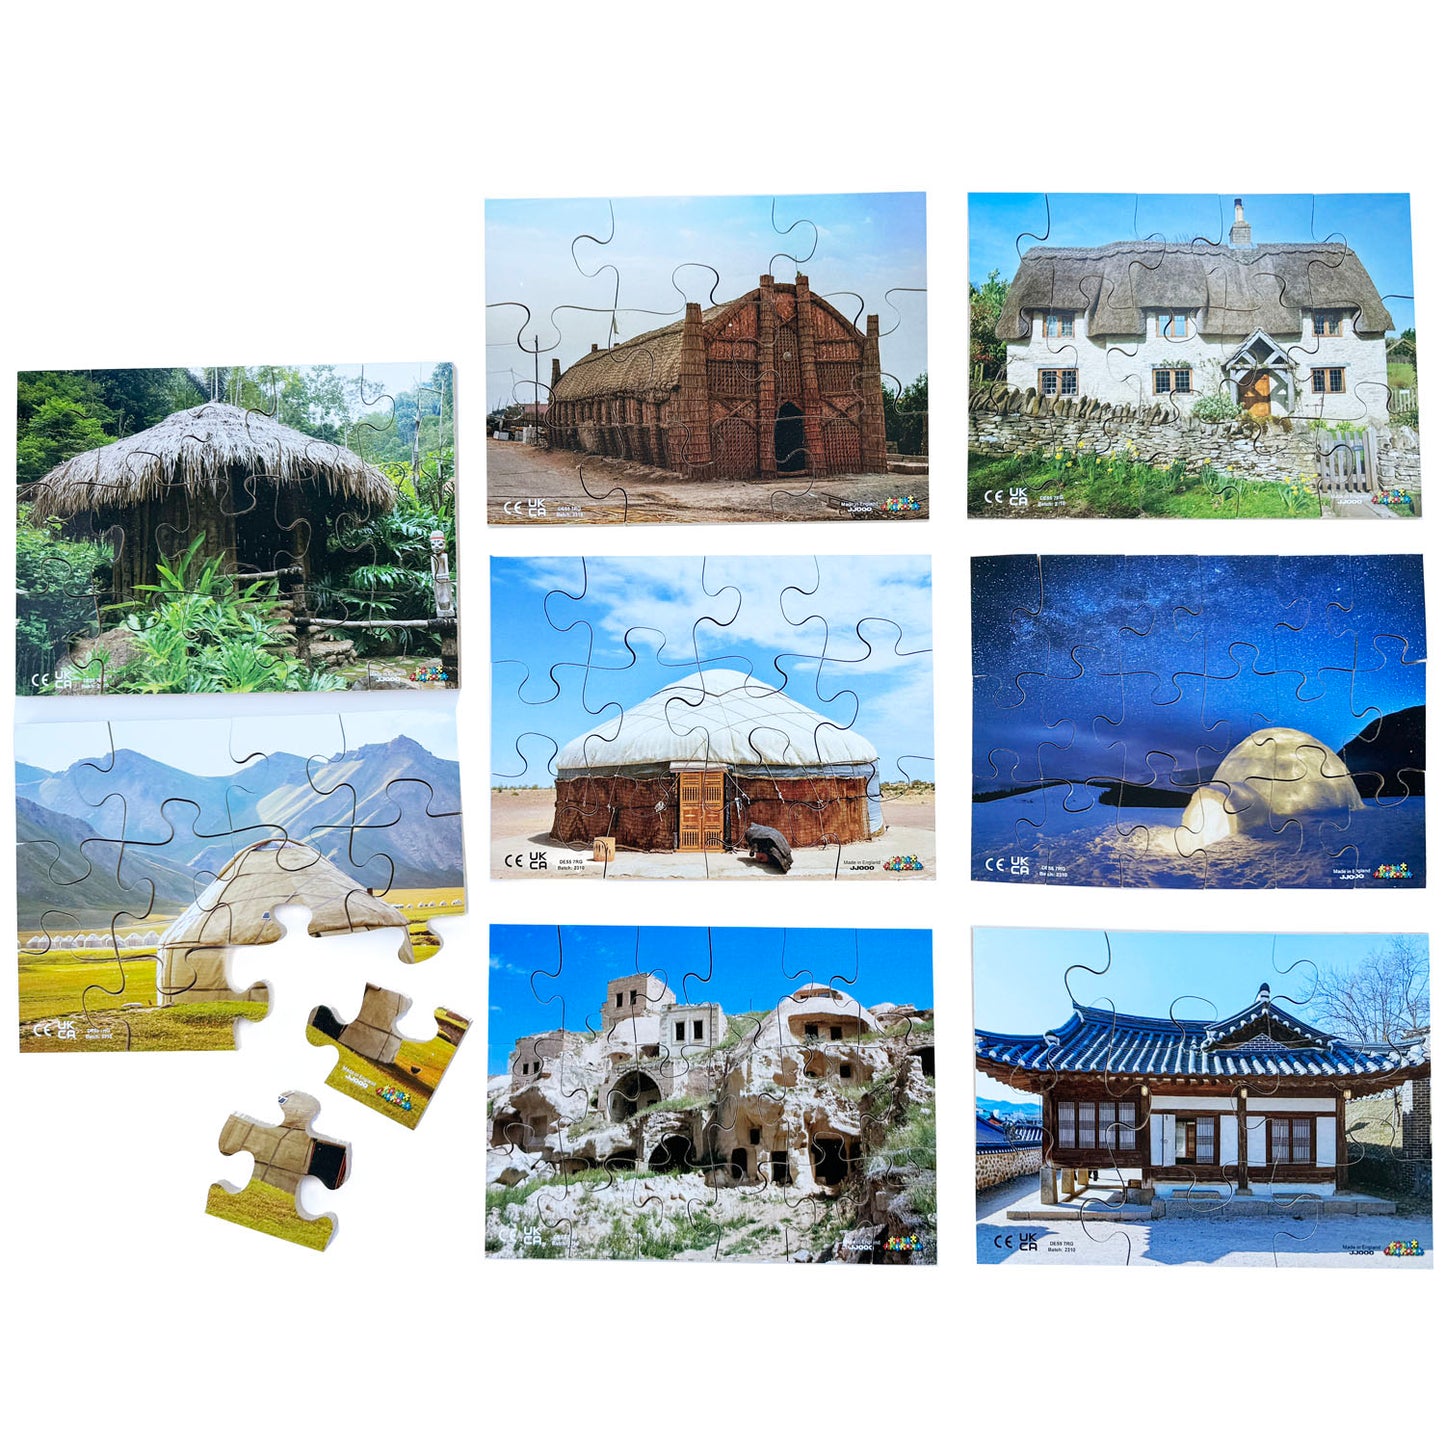 Homes around the World Photo Jigsaw Puzzles: Set of 8